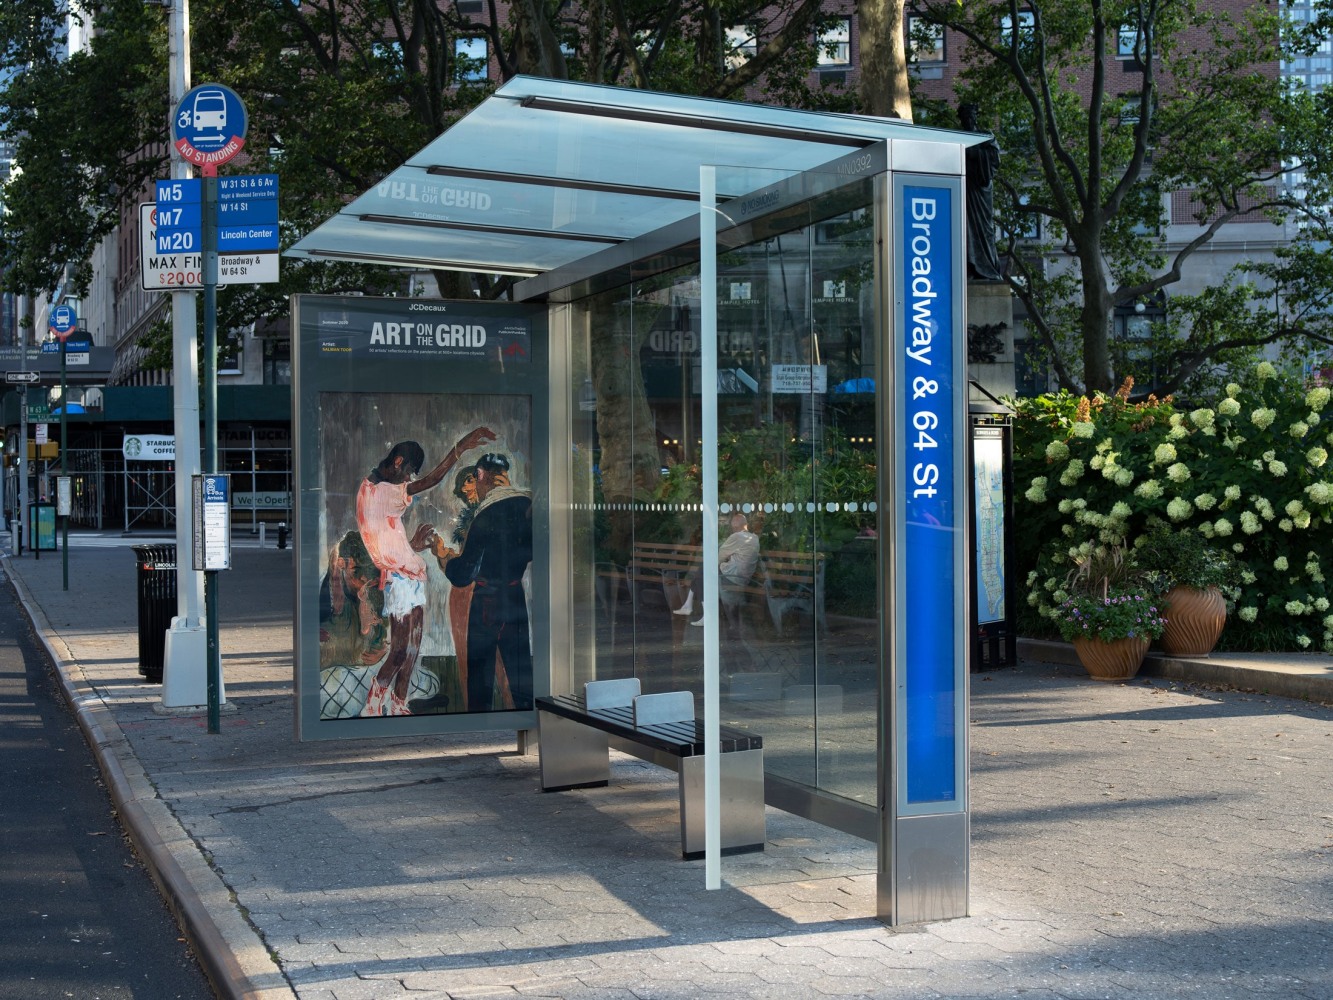 Salman Toor
Downtown Boys, 2020
Broadway between W 64 St&amp;nbsp;&amp;amp; W 63 St, Manhattan
Photographic work as a part of&amp;nbsp;Art on the Grid, presented by Public Art Fund on JCDecaux bus shelters citywide
June 29, 2020 &amp;ndash; September 20, 2020